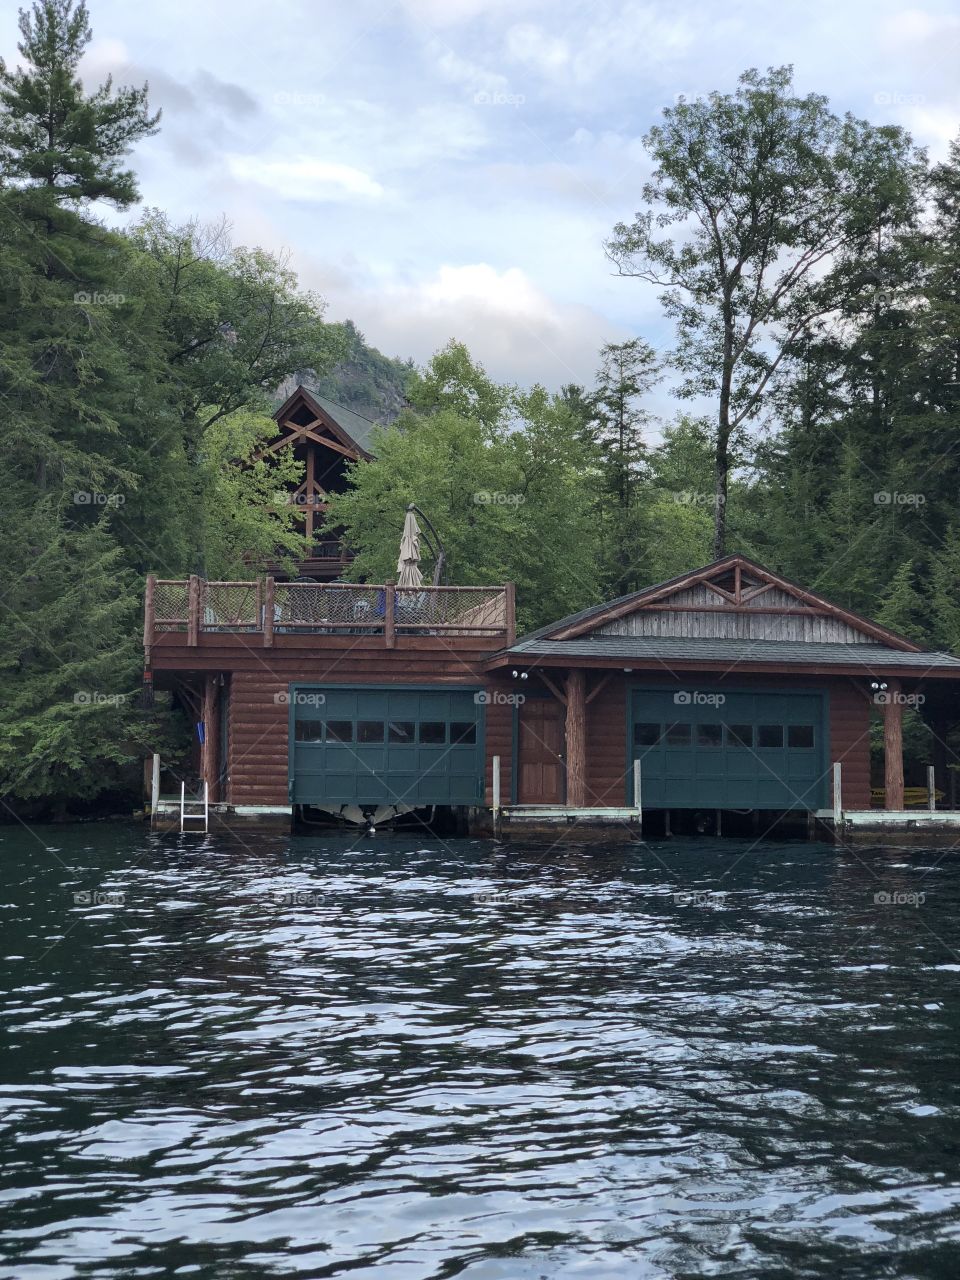 boat house in upstate new york